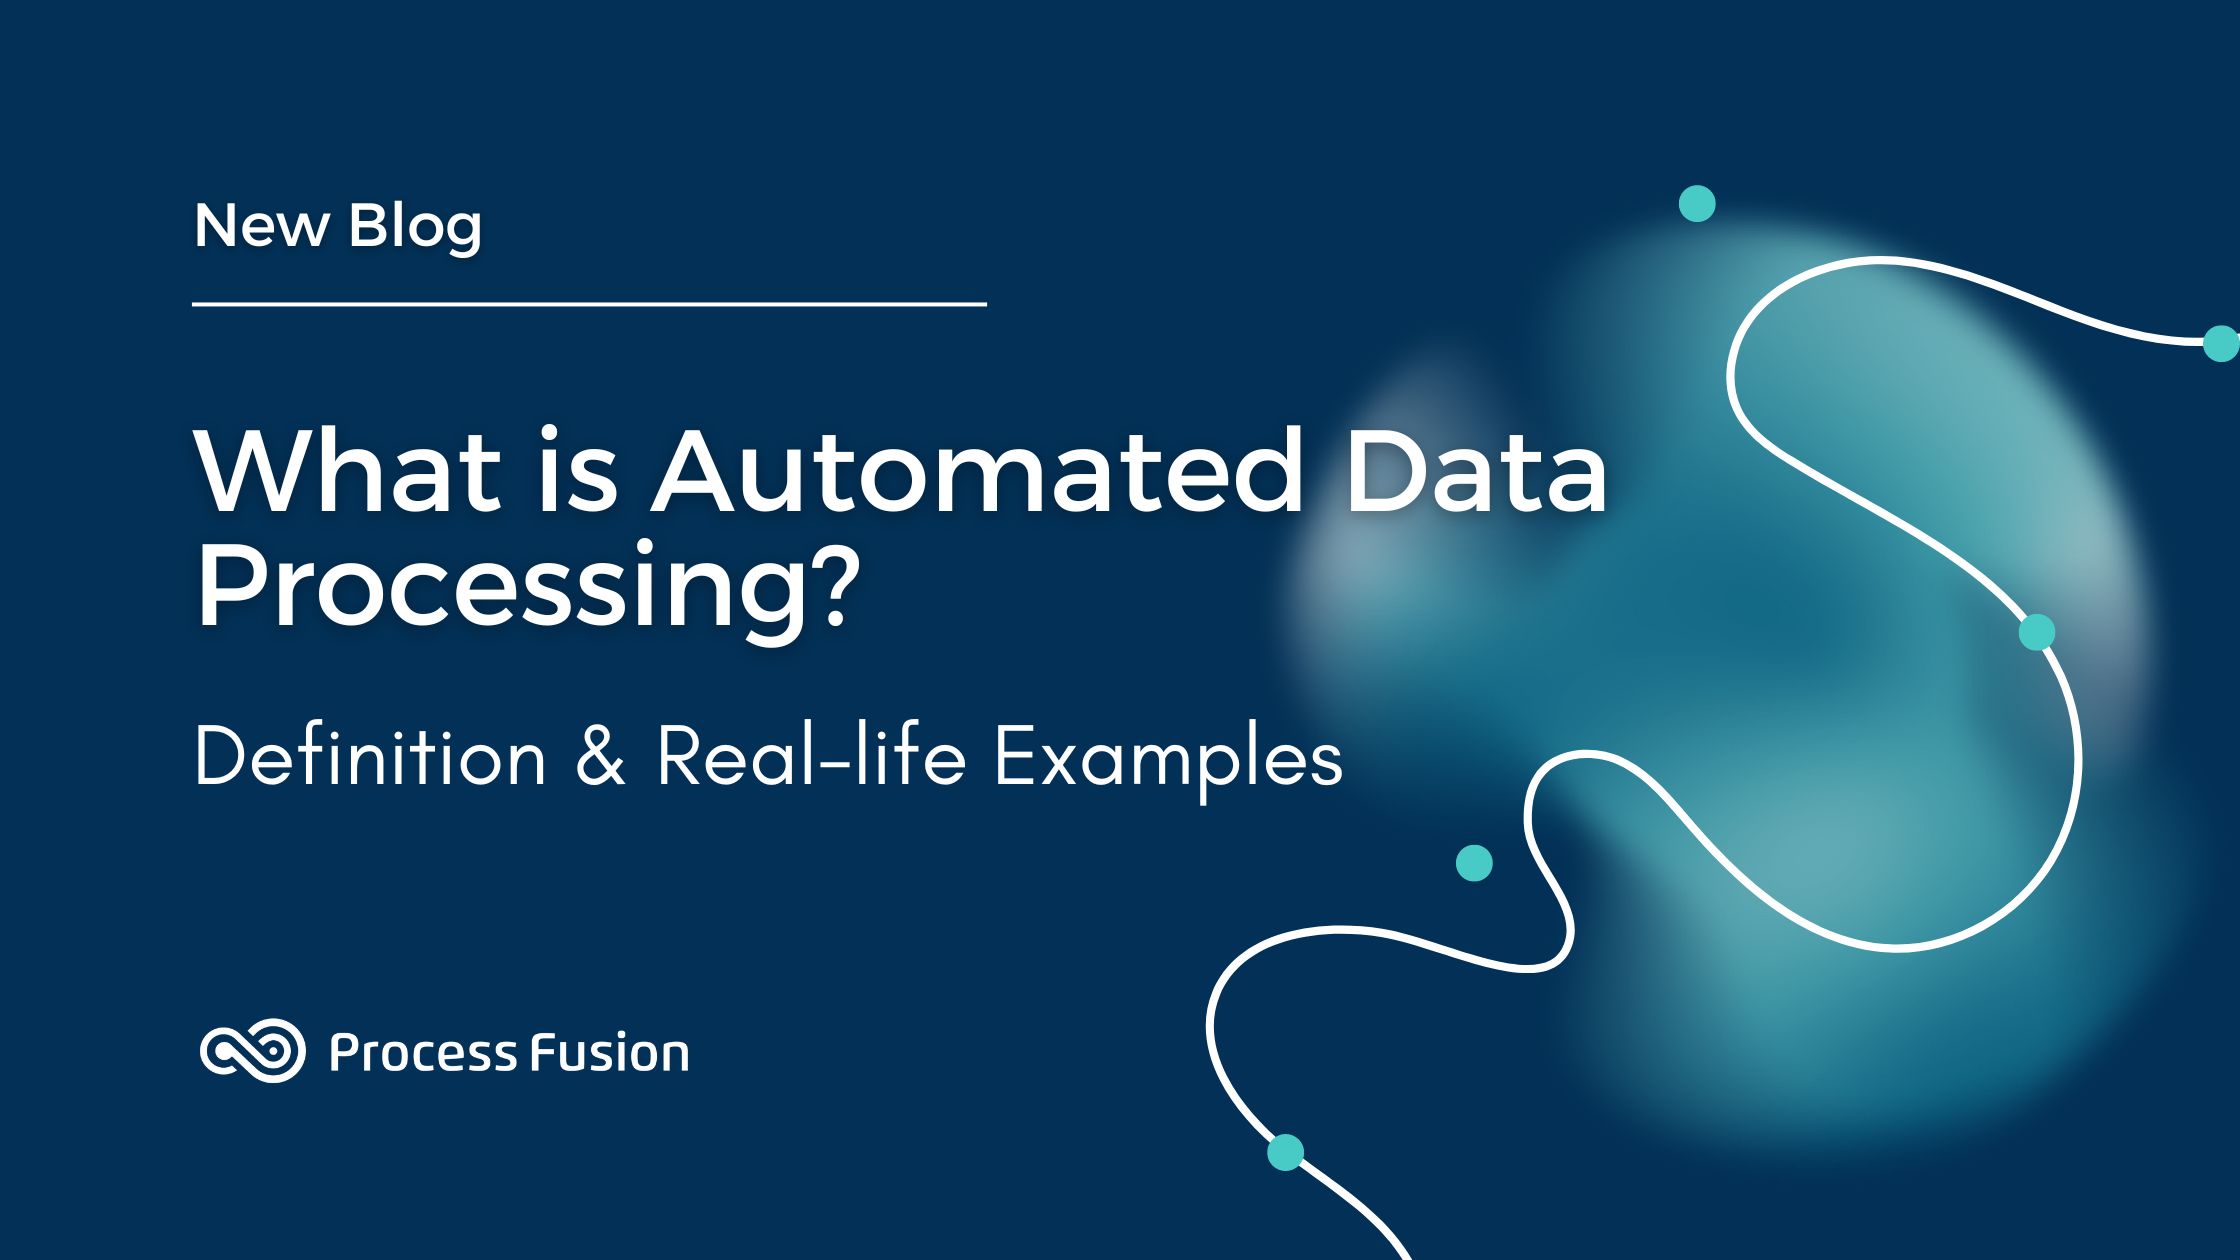 What is Automated Data Processing? Definition and Real-life Examples